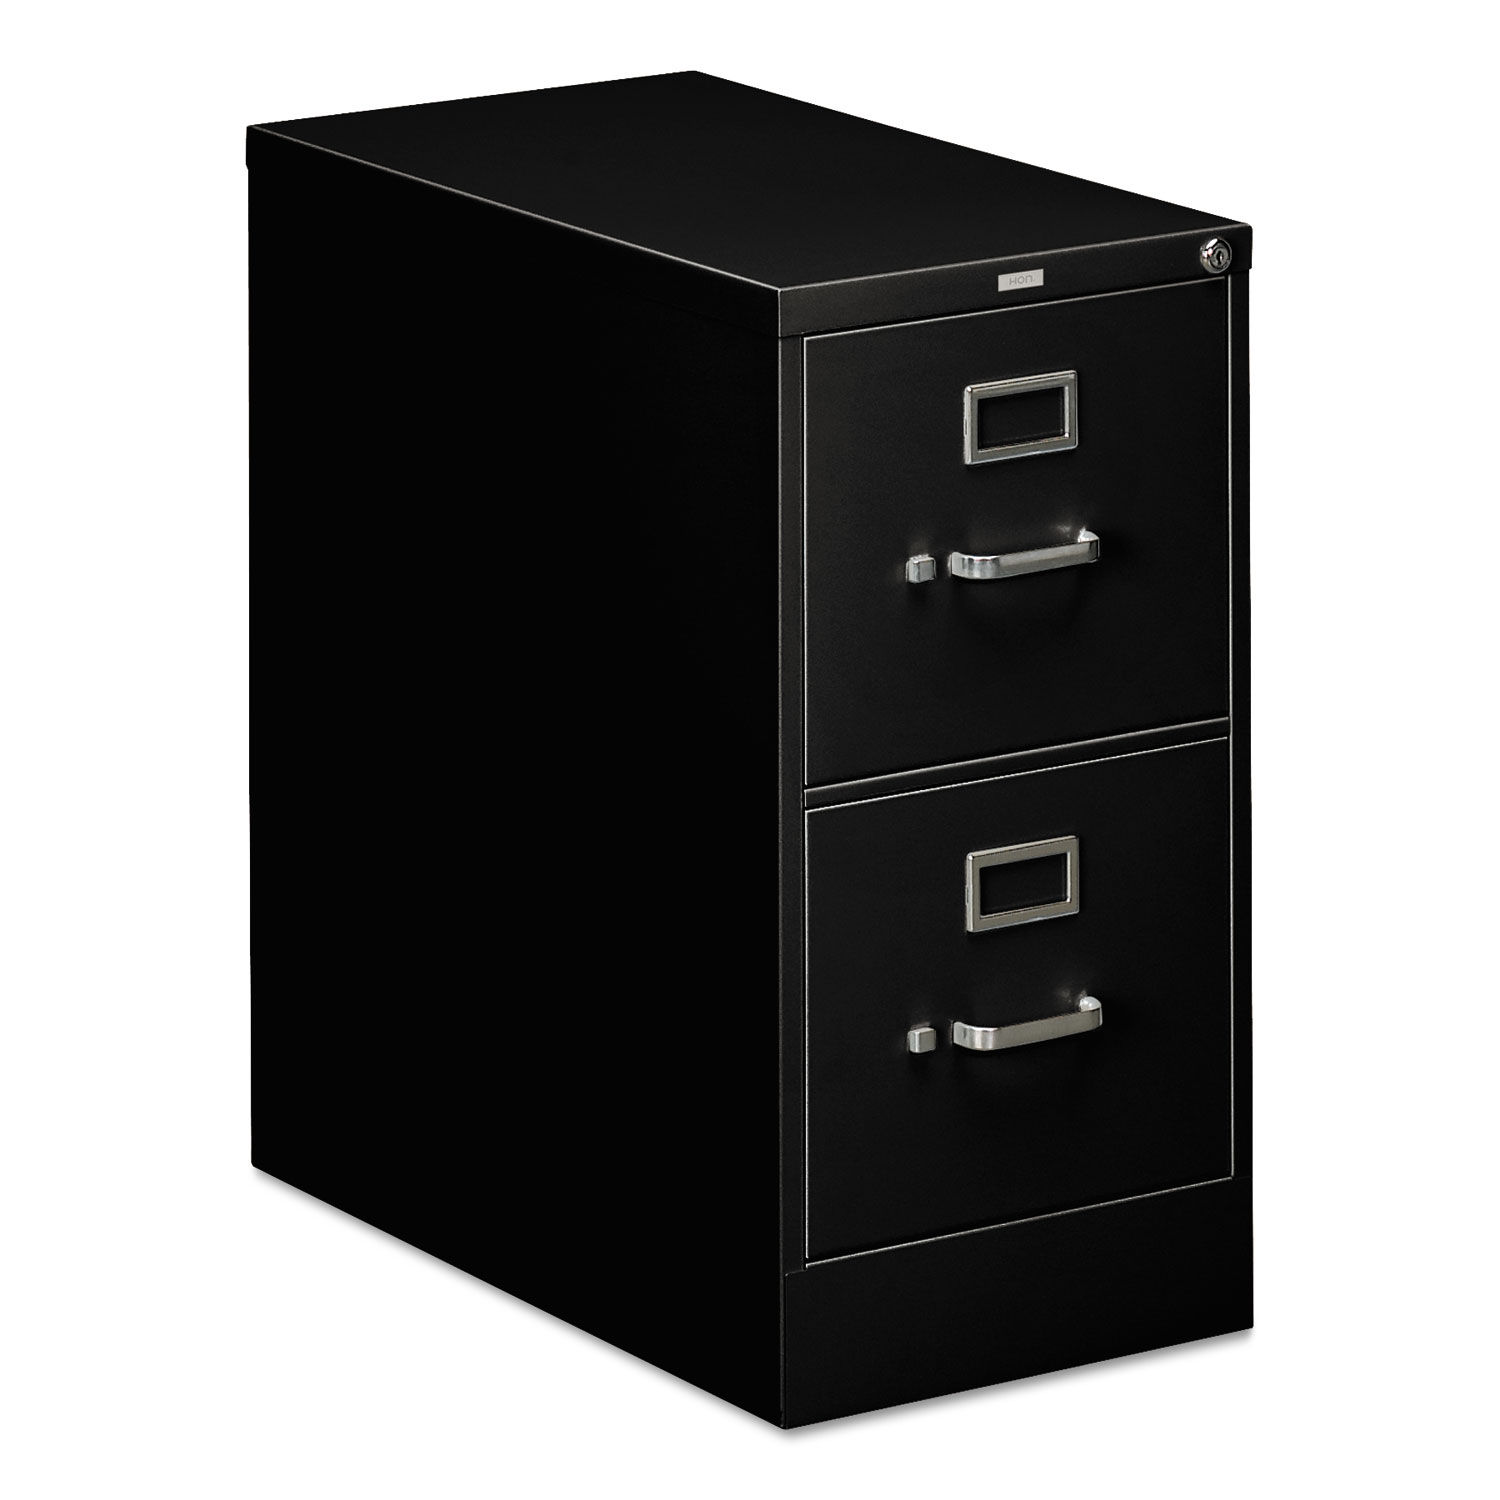 310 Series Vertical File 2 Letter-Size File Drawers, Black, 15" x 26.5" x 29"